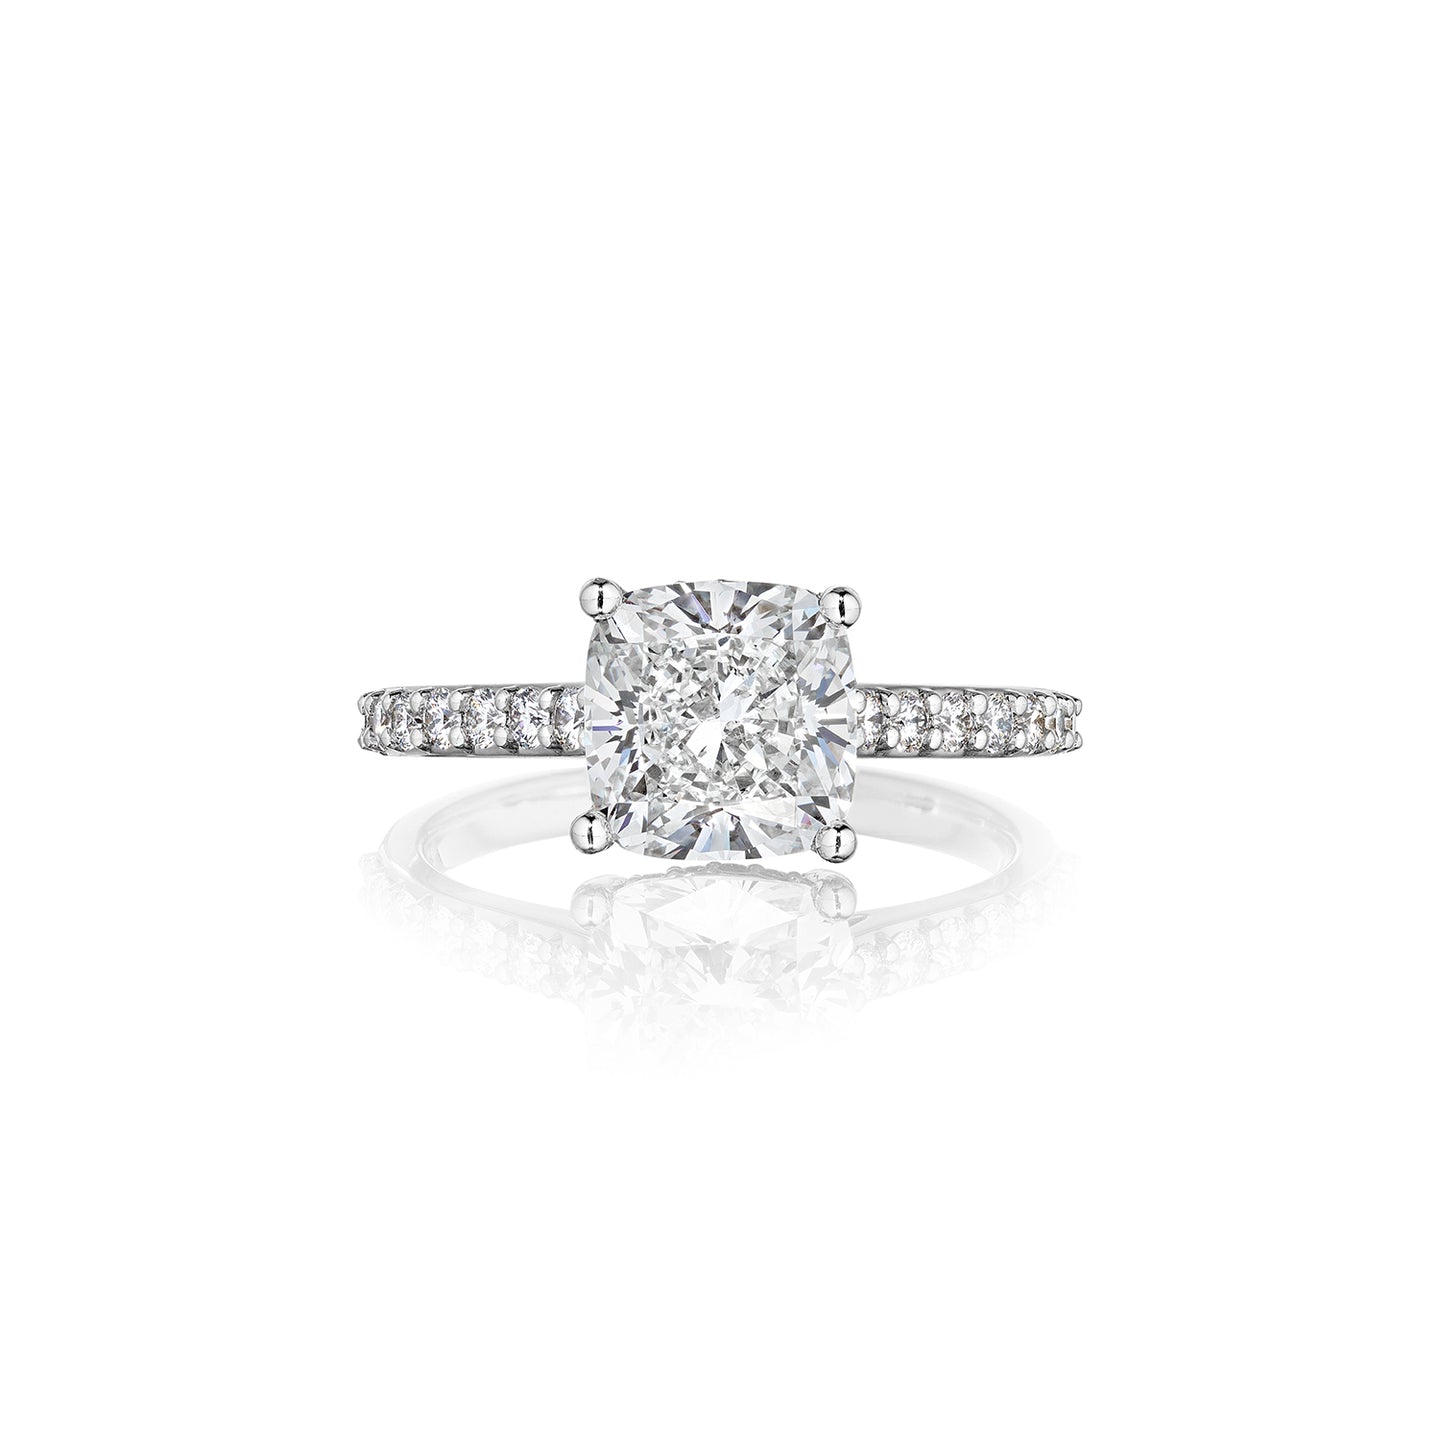 Fink's Exclusive Platinum Cushion Cut Diamond Engagement Ring with Diamond Shank Accents